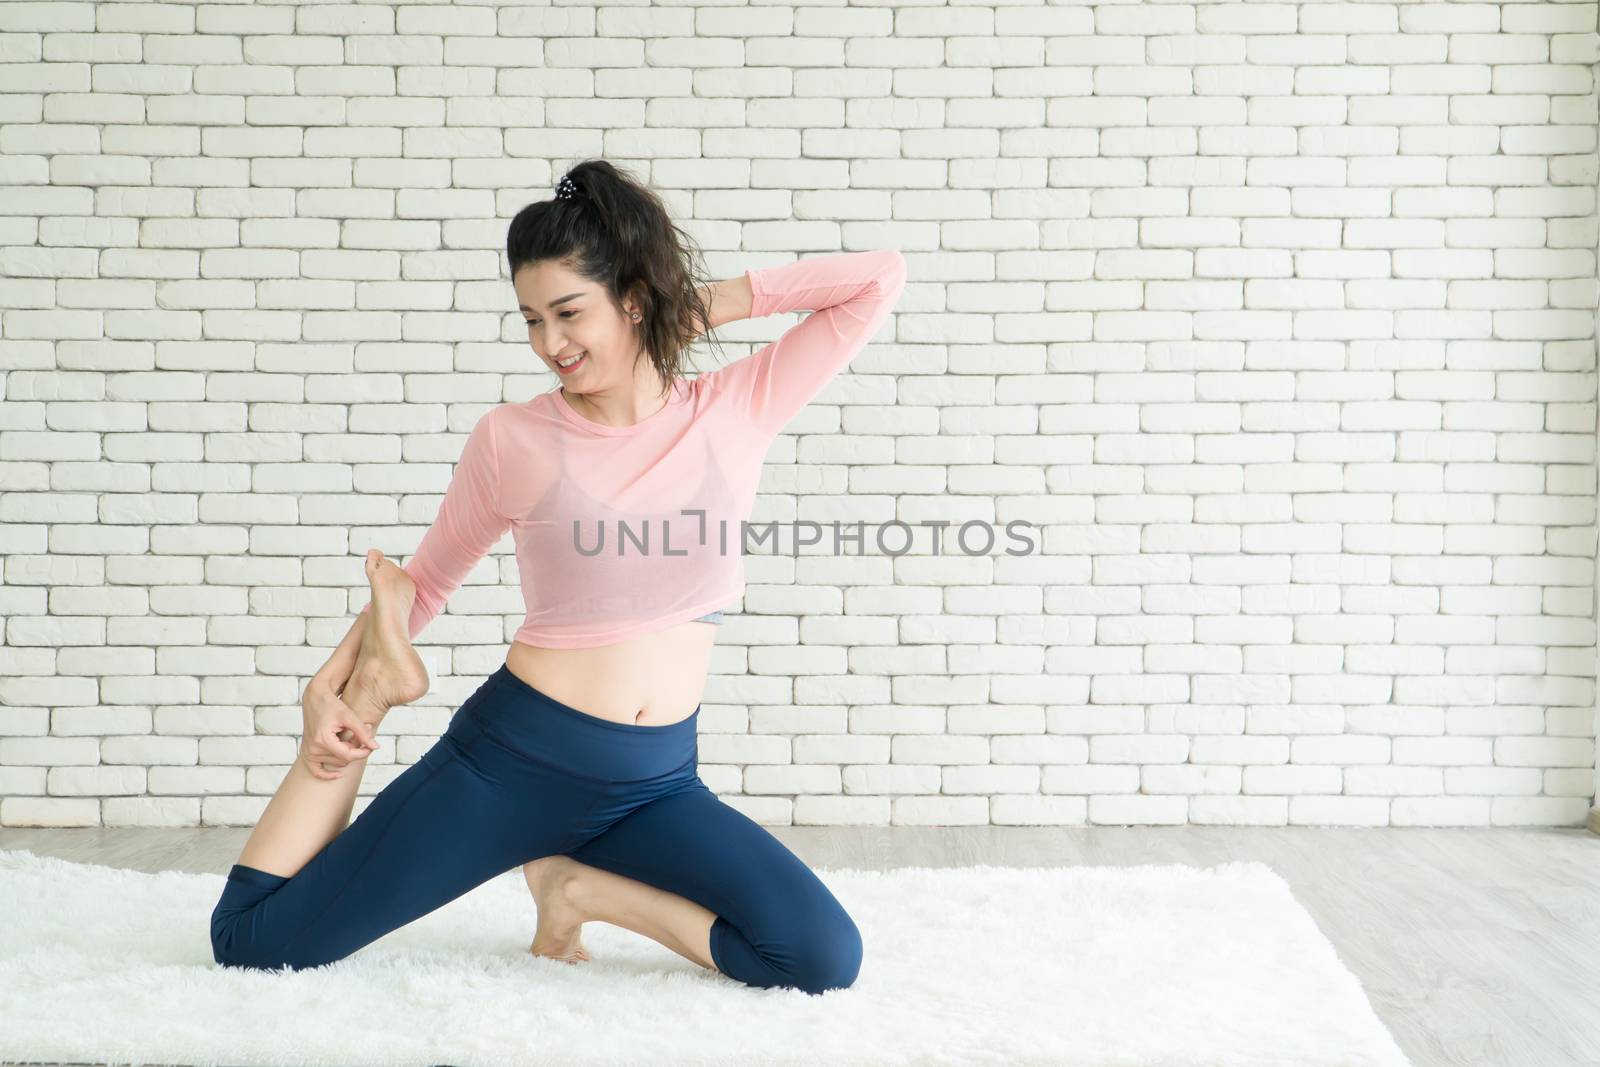 Attractive and healthy woman Asian are exercising Stretching with yoga postures at home helps to balance life.copy space is on the left side of the image For adding text